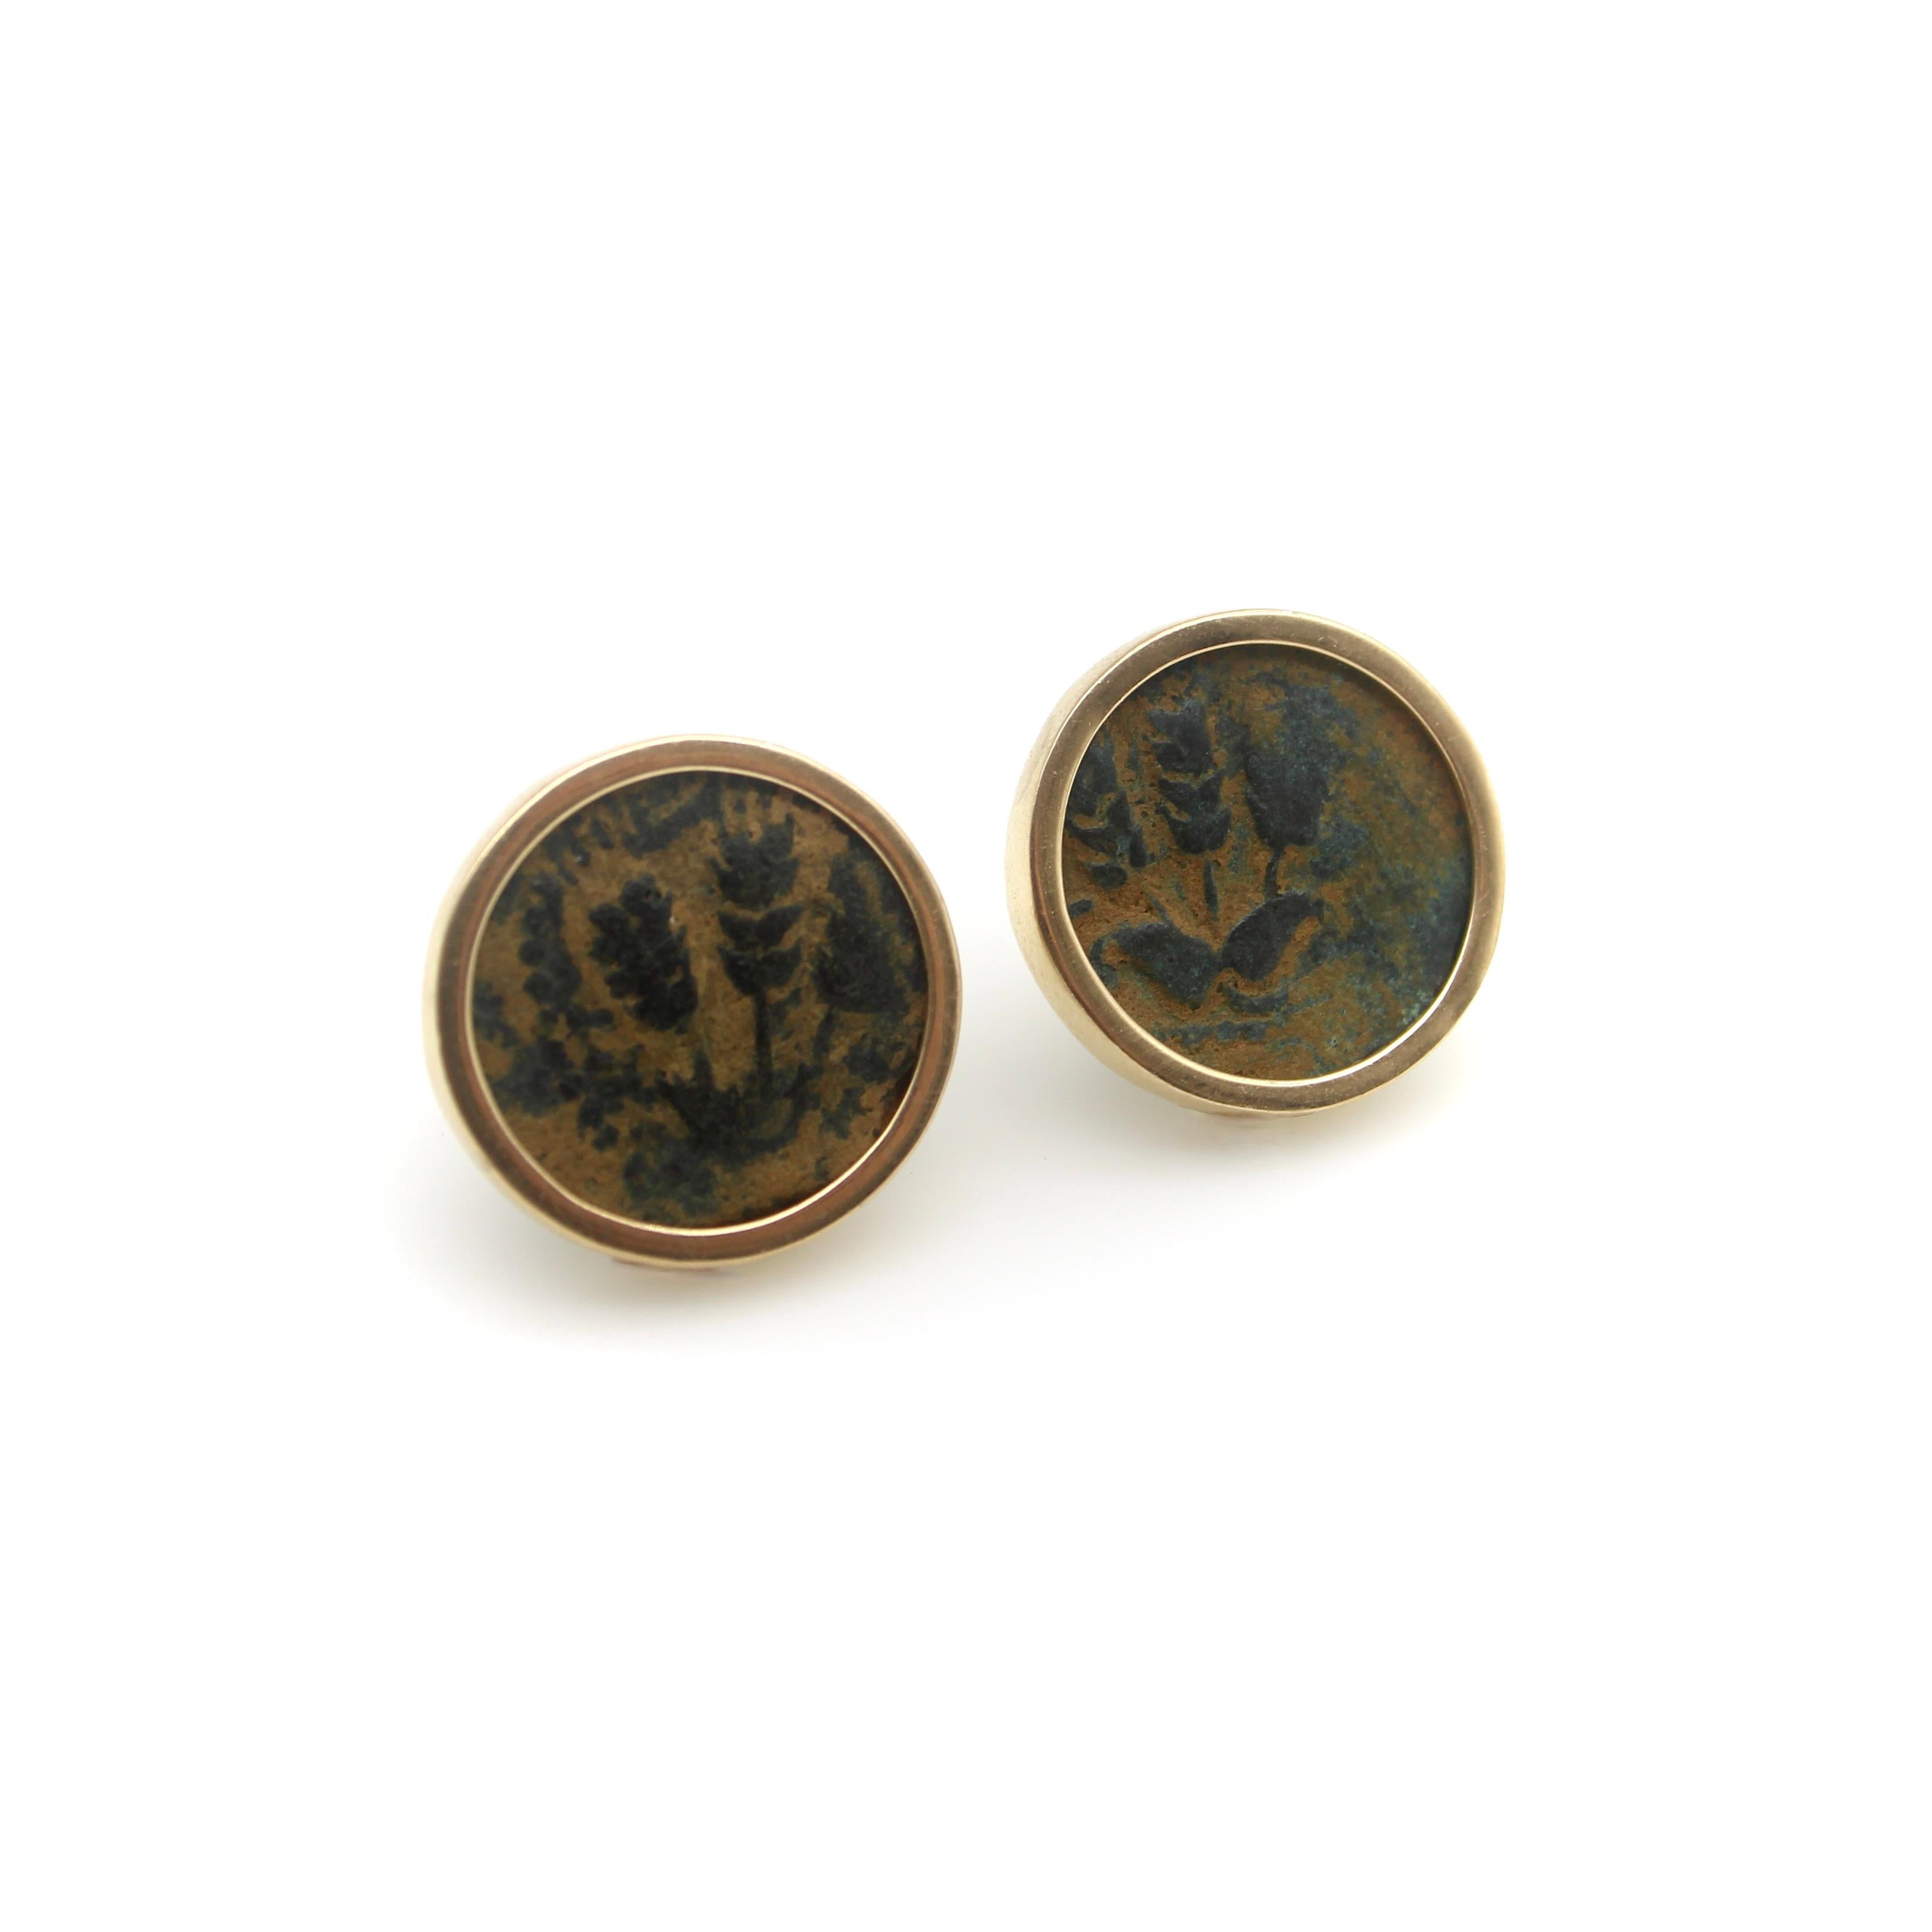 These 14k gold earrings feature ancient coins that were minted in Jerusalem in 42 A.D.  The coins were minted during the reign of Herod Agrippa I—the grandson of Harod the Great—who ruled over the entire country of Israel and Northern Transjordan.